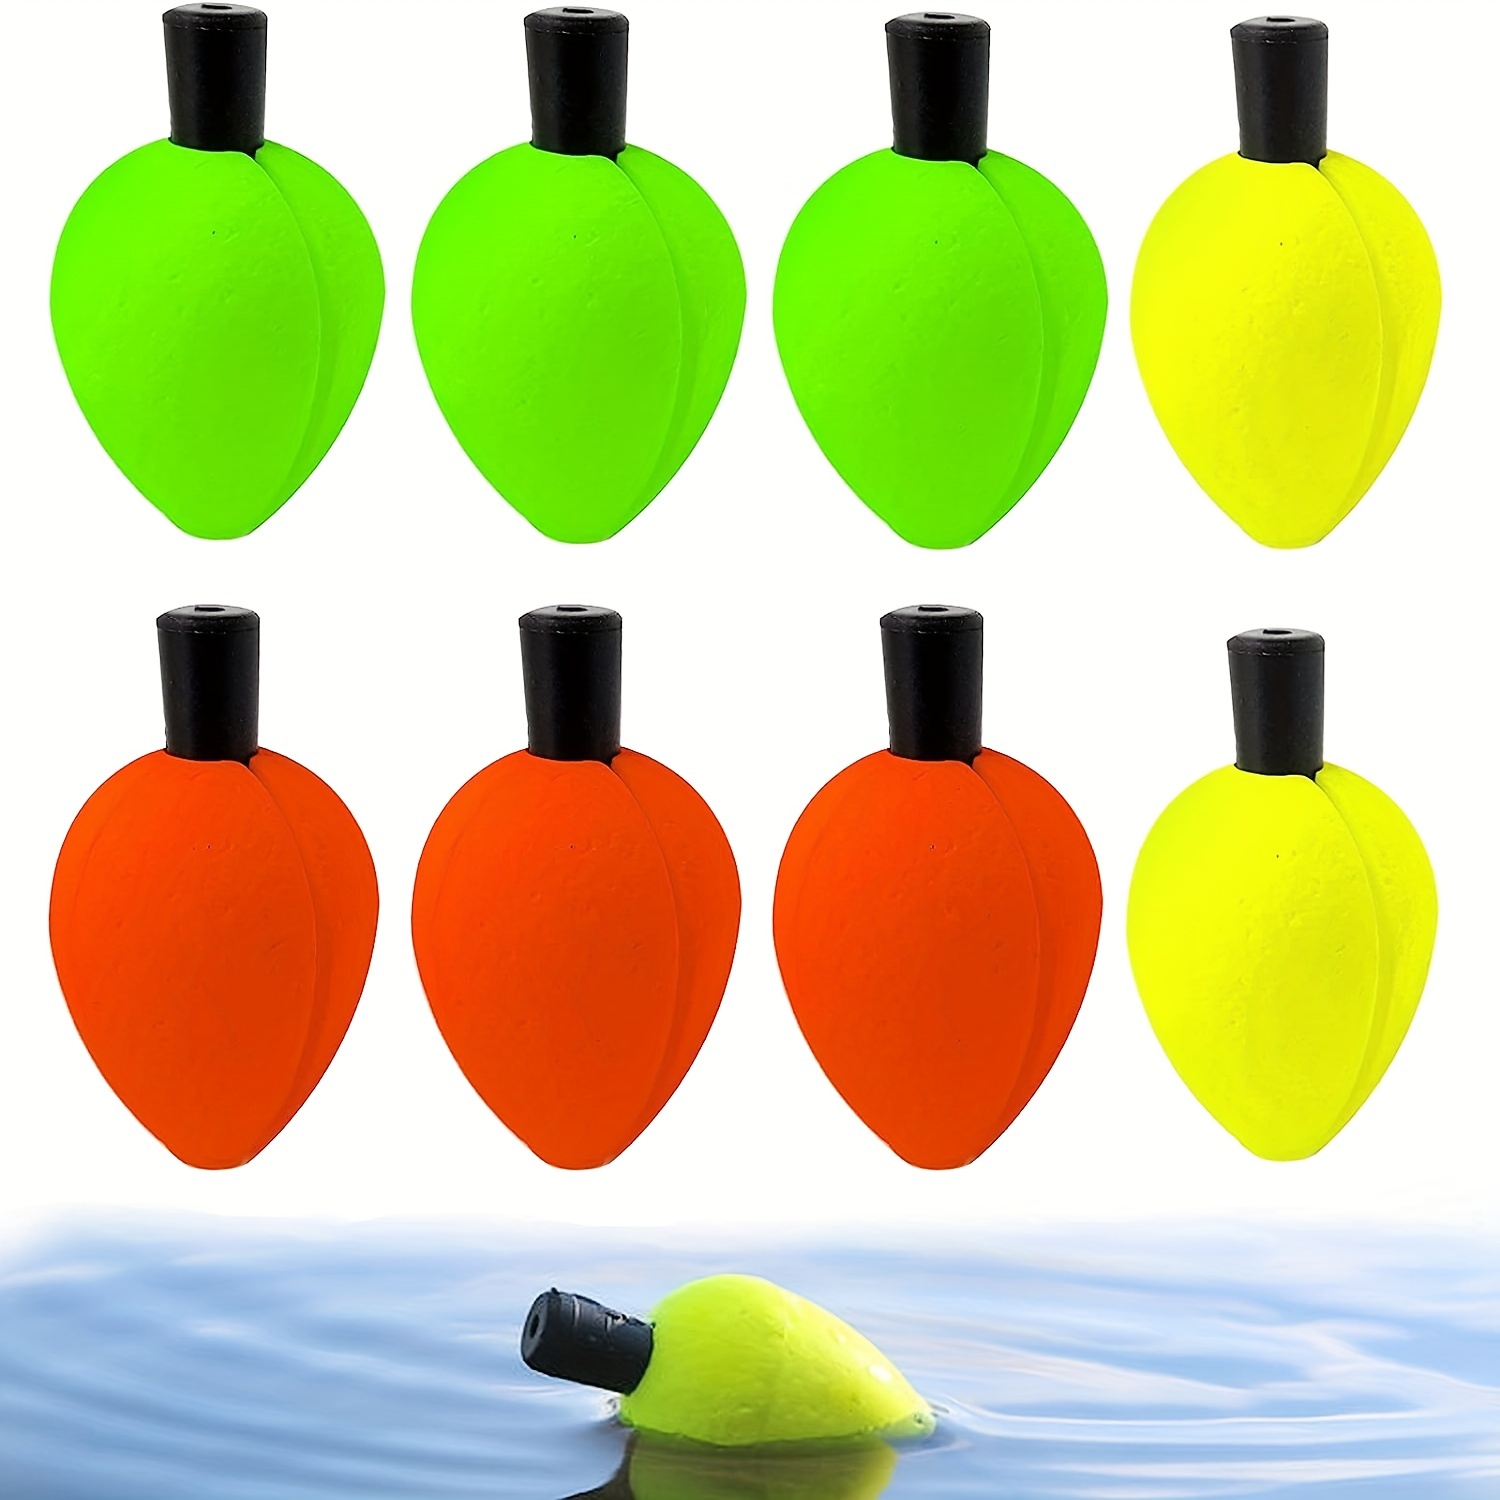 30pcs Bobber Stoppers: Keep Your Fishing Lures in *!